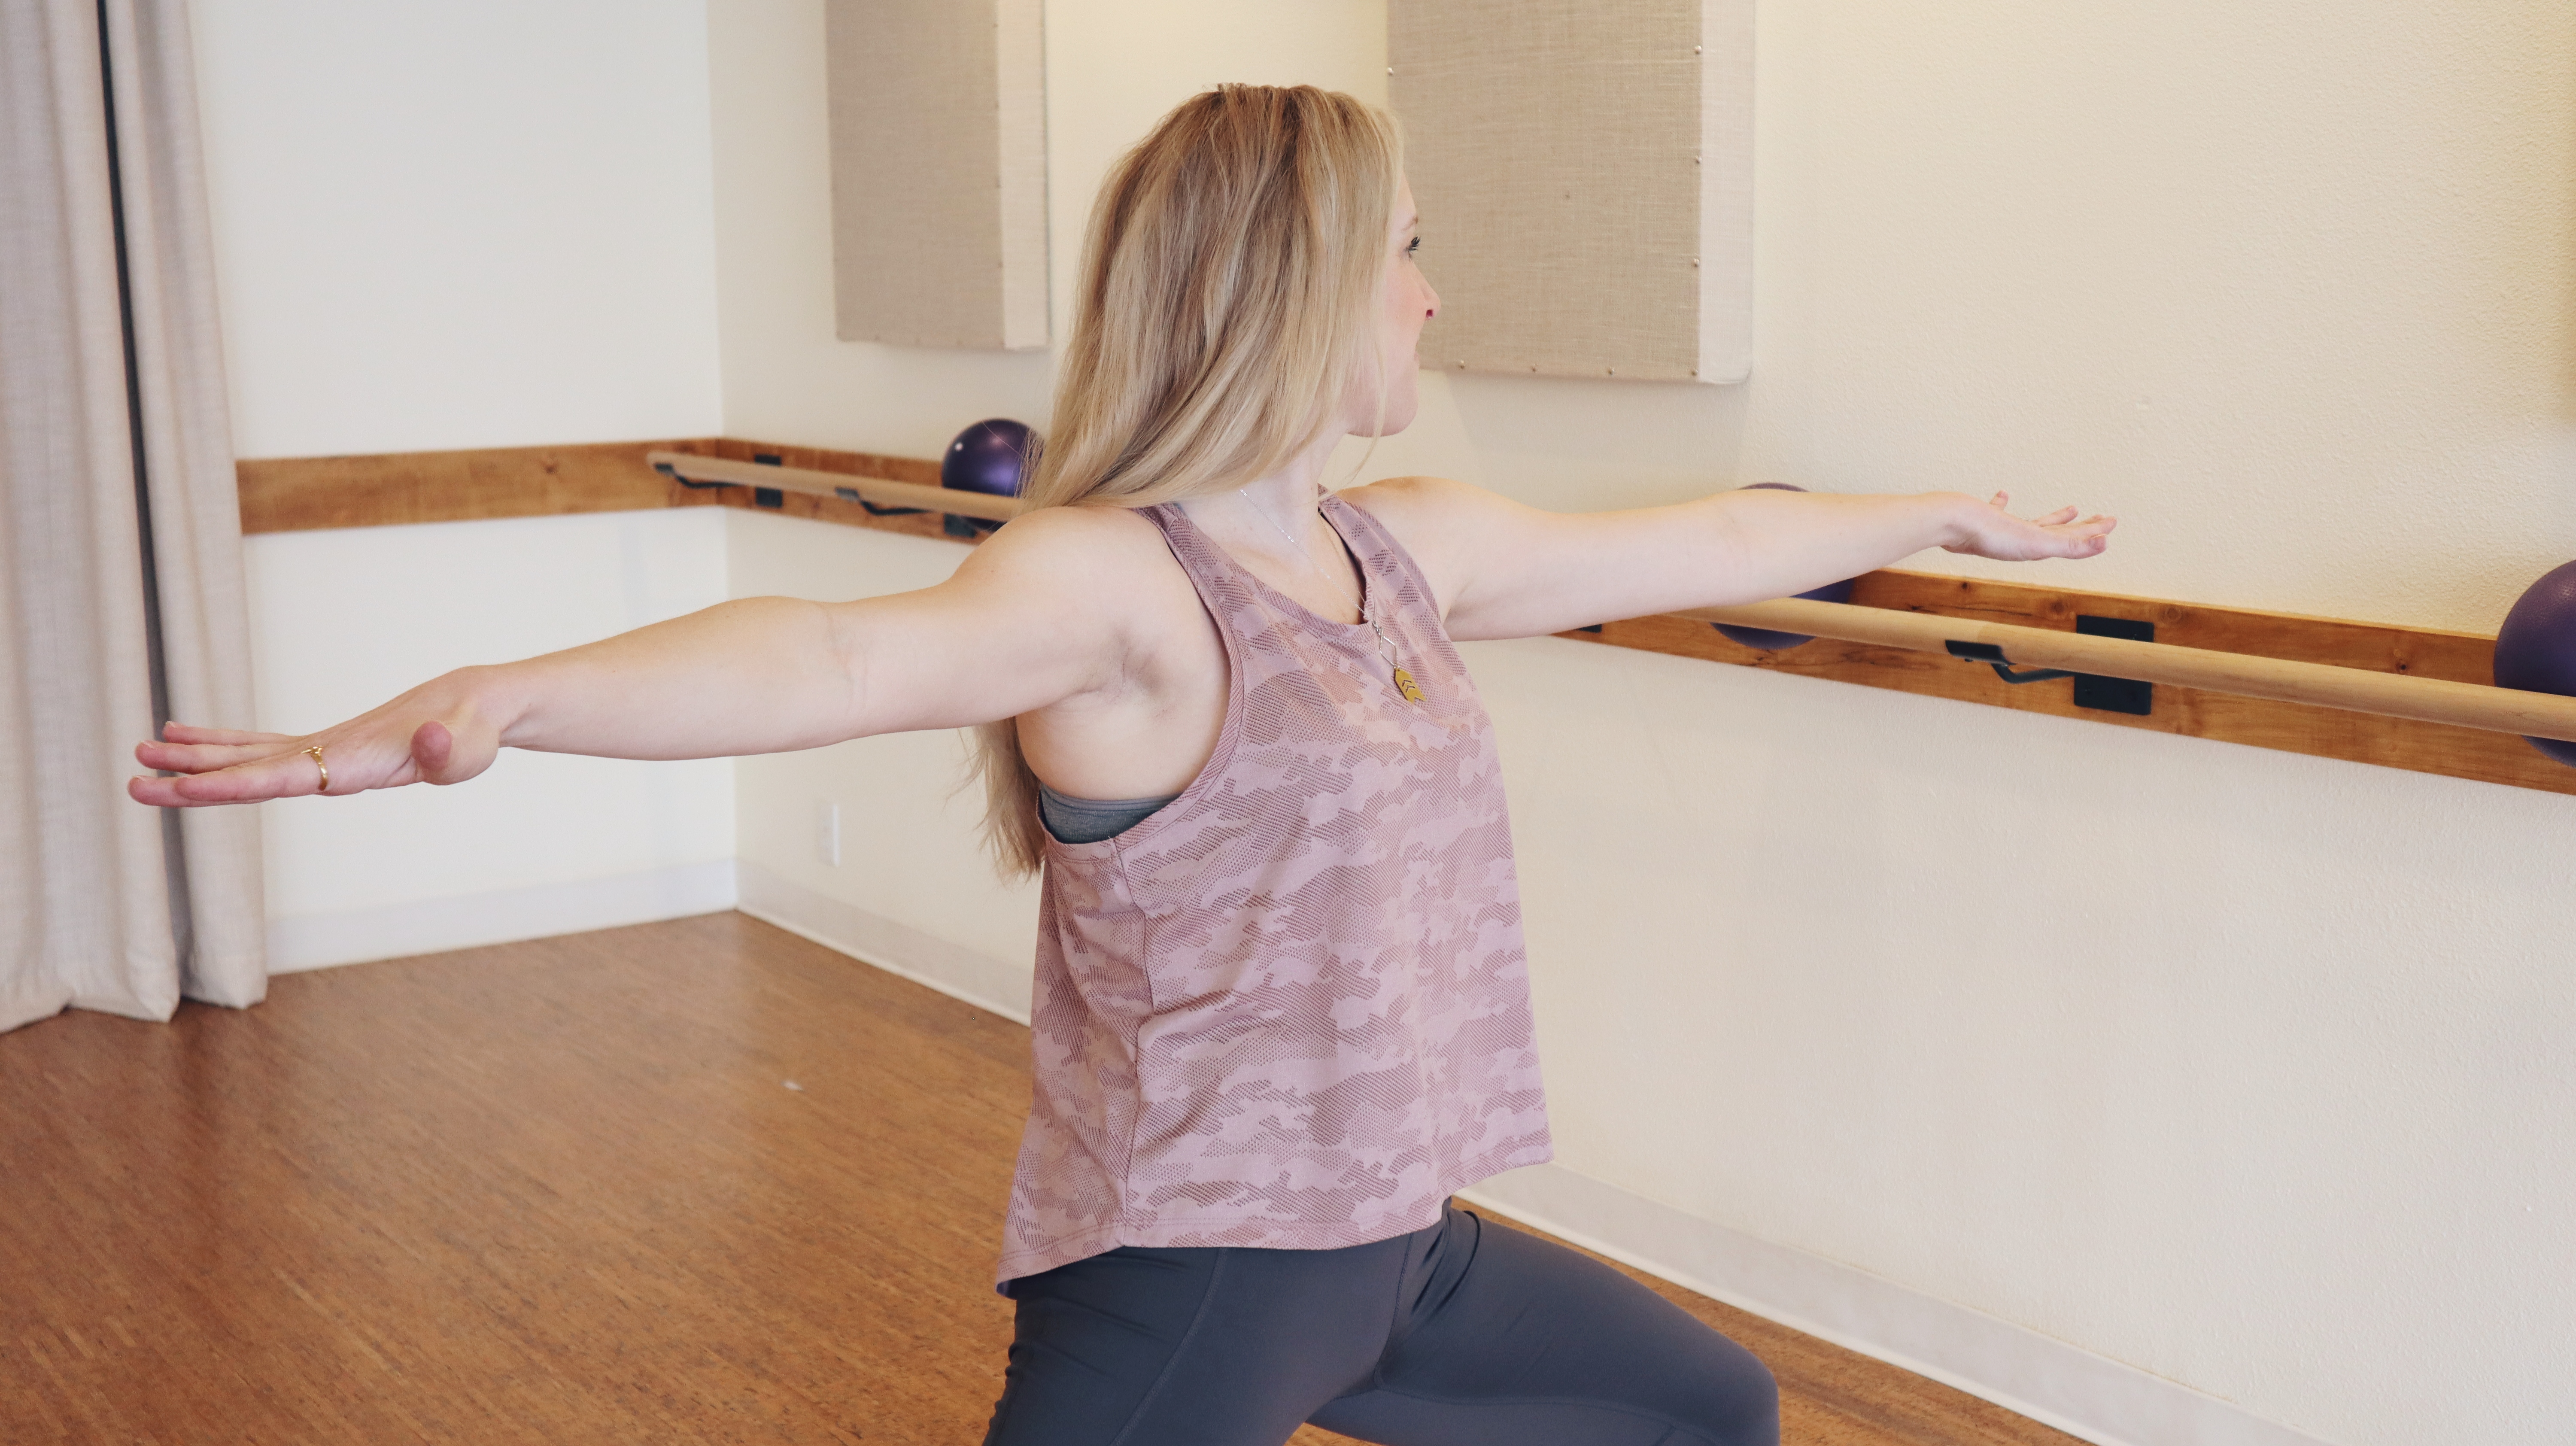 About Us - The Yoga Barre